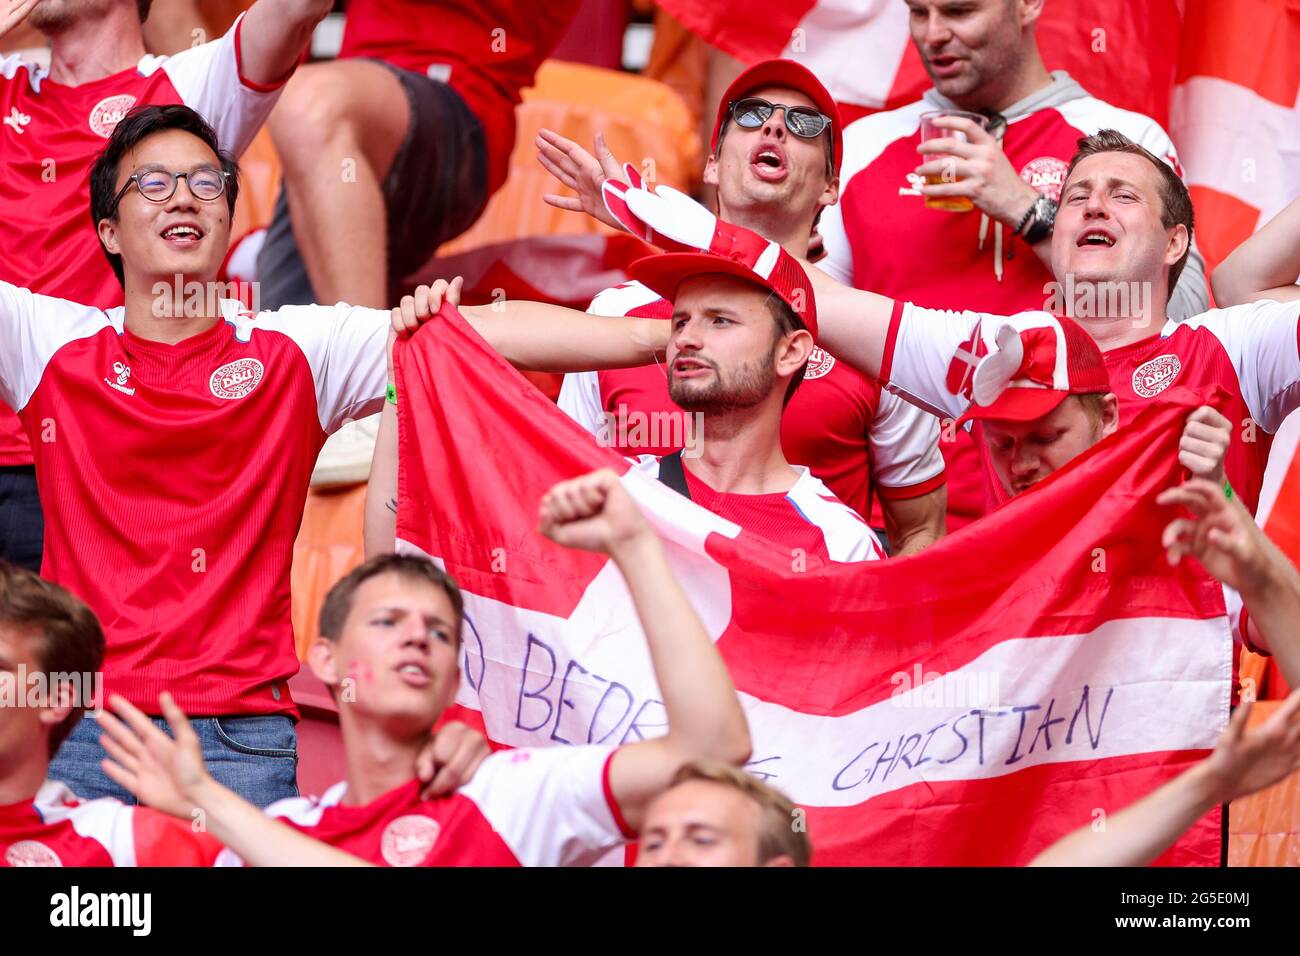 AMSTERDAM, NETHERLANDS - JUNE 26: Fans of Denmark during the UEFA Euro 2020 Championship 1/8 final match between Wales and Denmark at the Johan Cruijff ArenA on June 26, 2021 in Amsterdam, Netherlands (Photo by Marcel ter Bals/Orange Pictures) Credit: Orange Pics BV/Alamy Live News Stock Photo